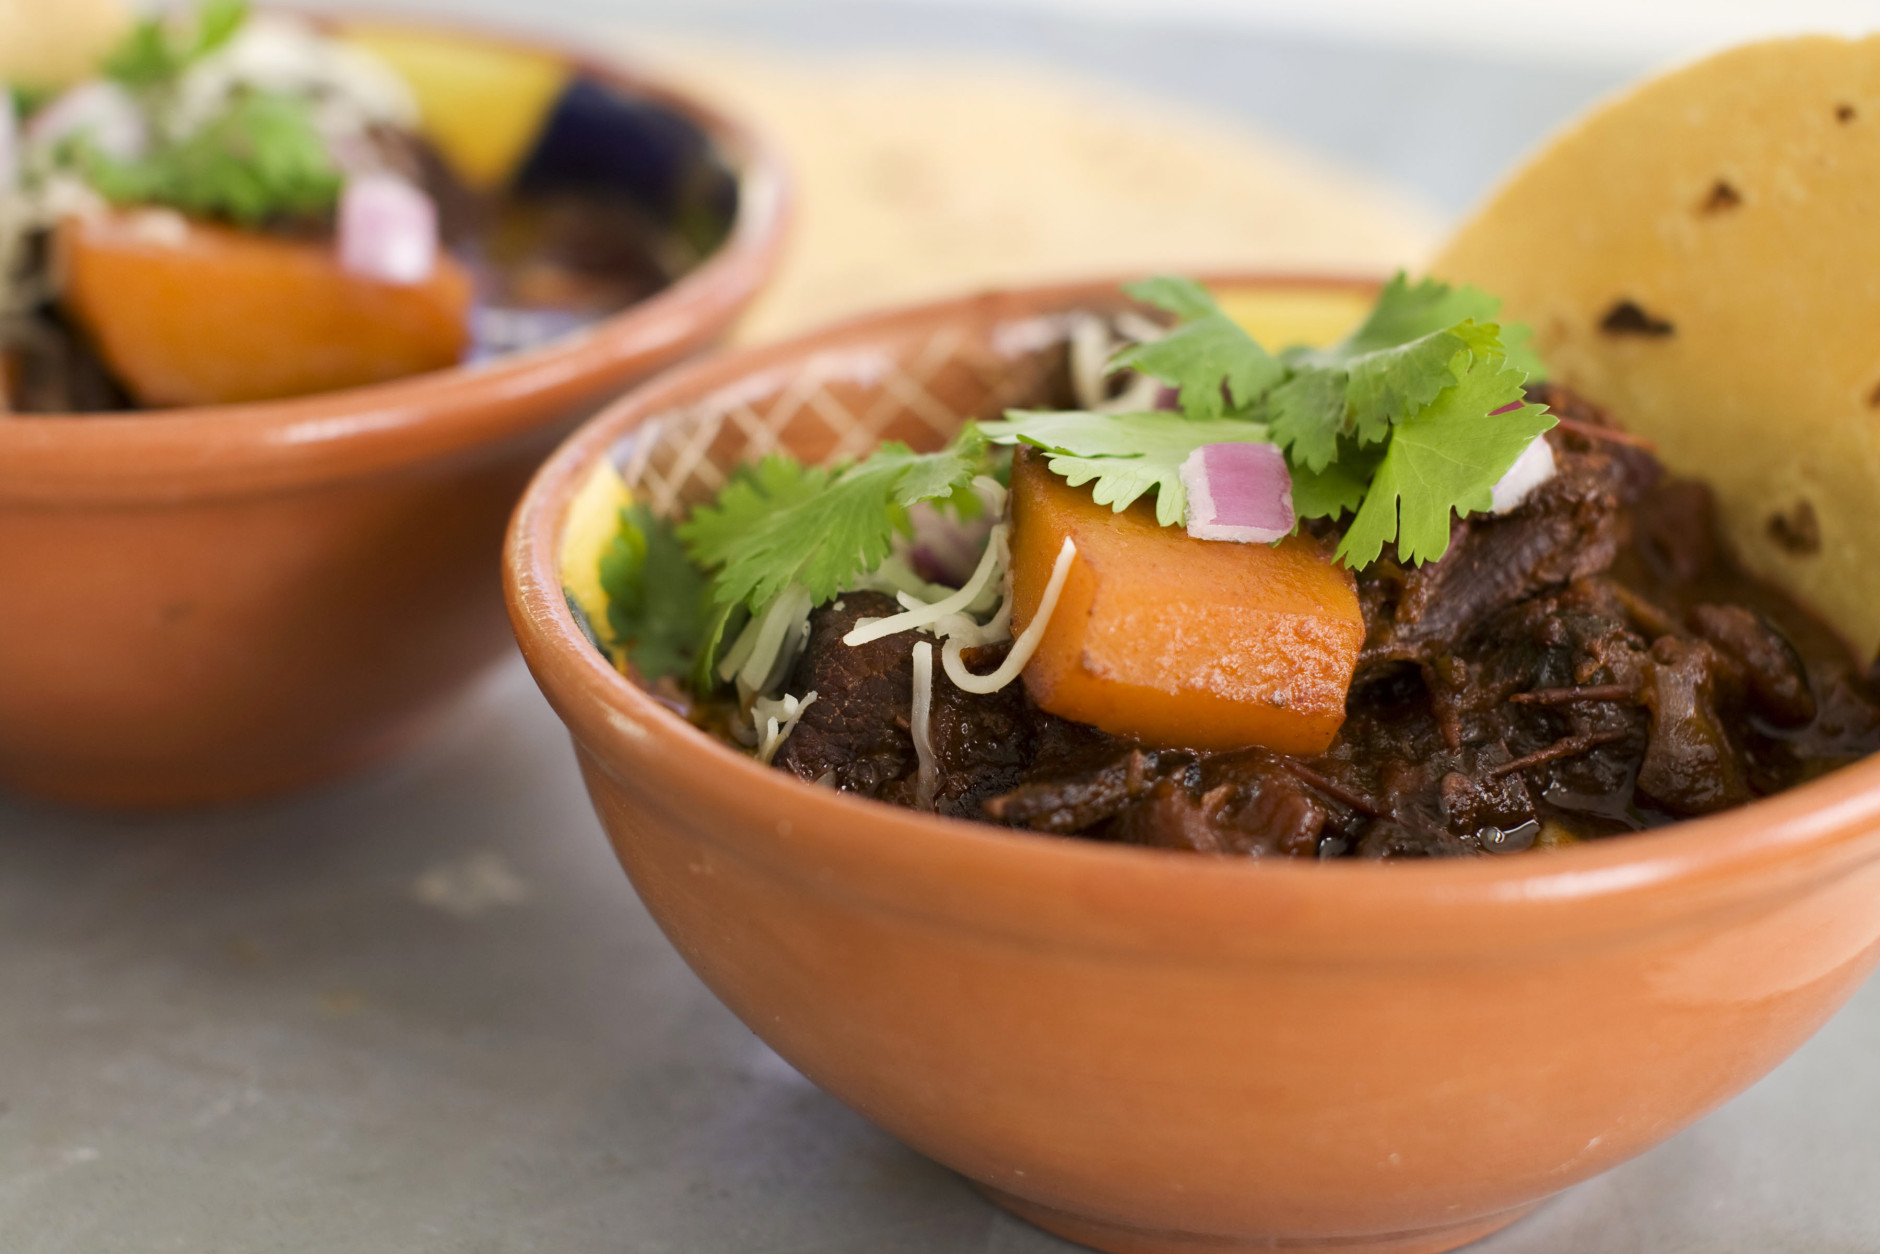 In this image taken on January 7, 2013, Mexican beef brisket and winter squash chili is shown served in bowls in Concord, N.H. (AP Photo/Matthew Mead)